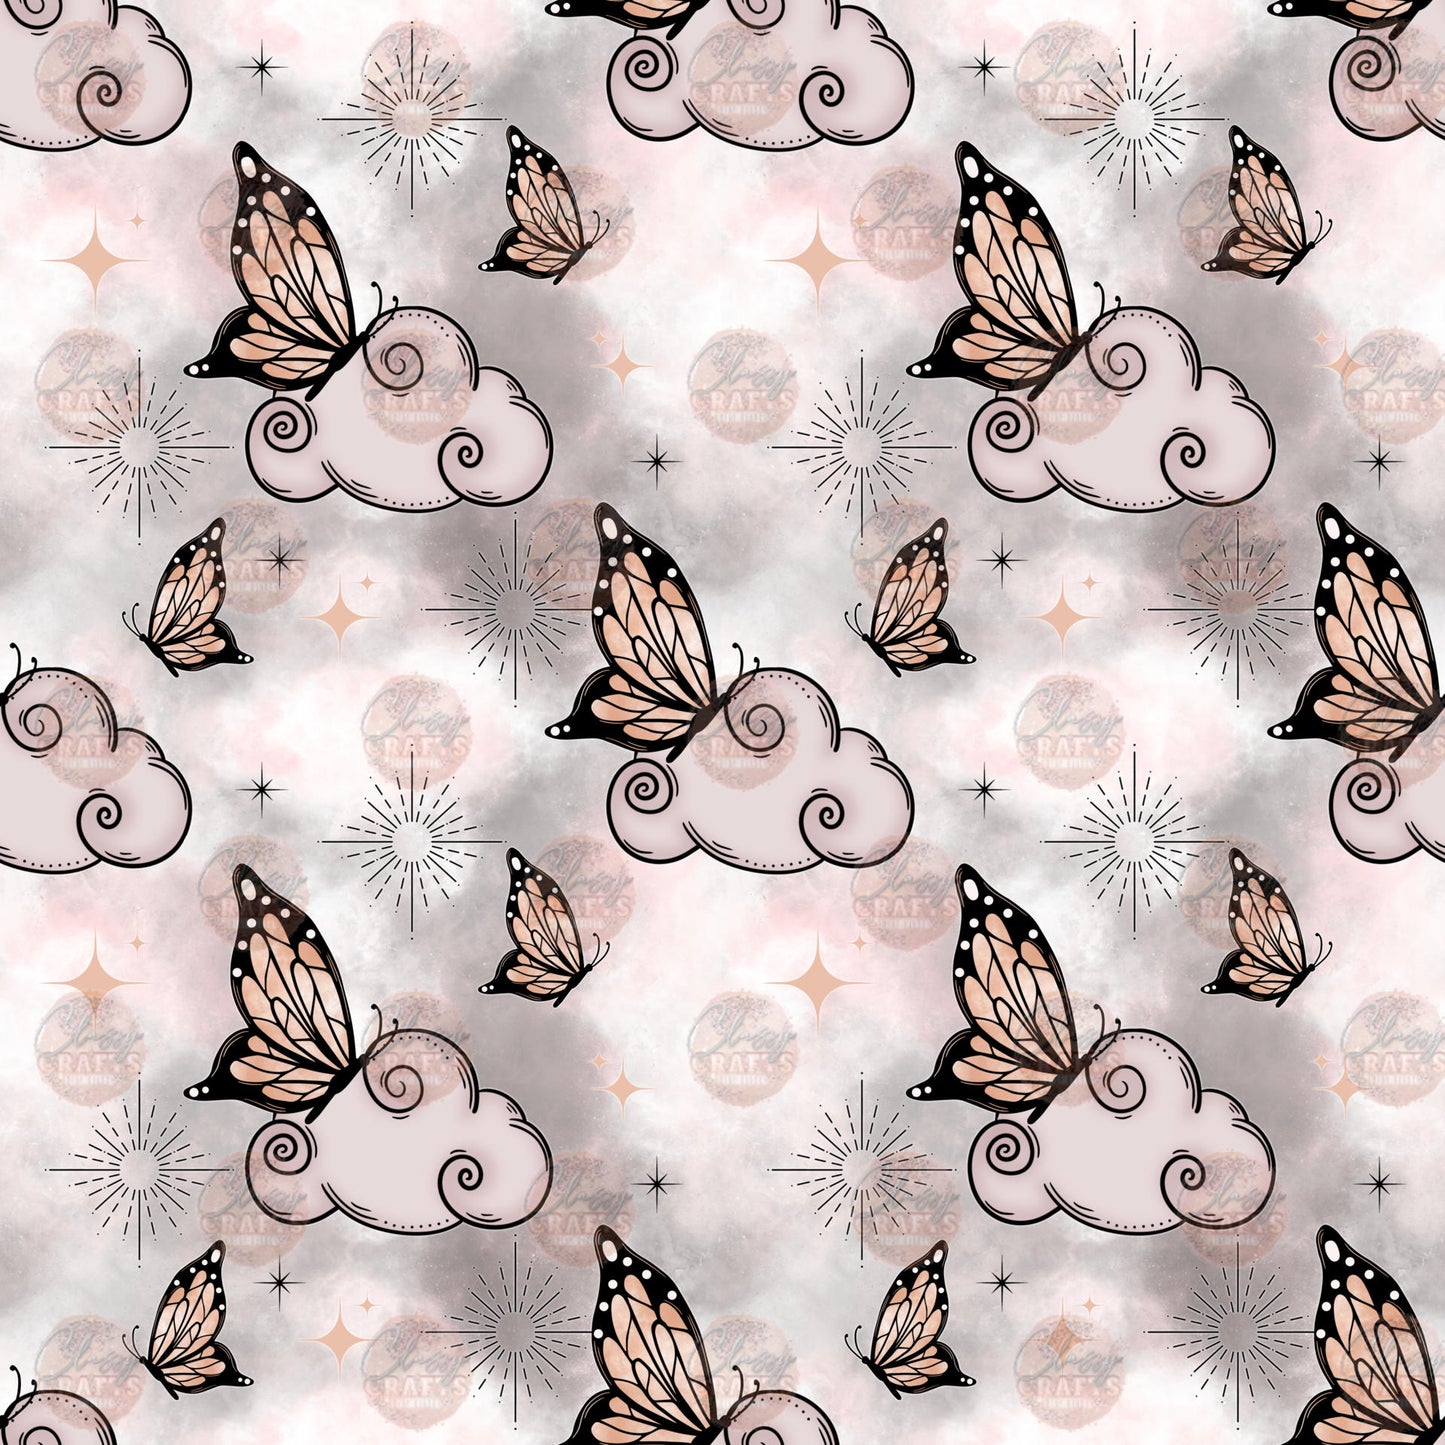 Cloud Butterfly 2 Seamless Wrap - Sublimation Transfer